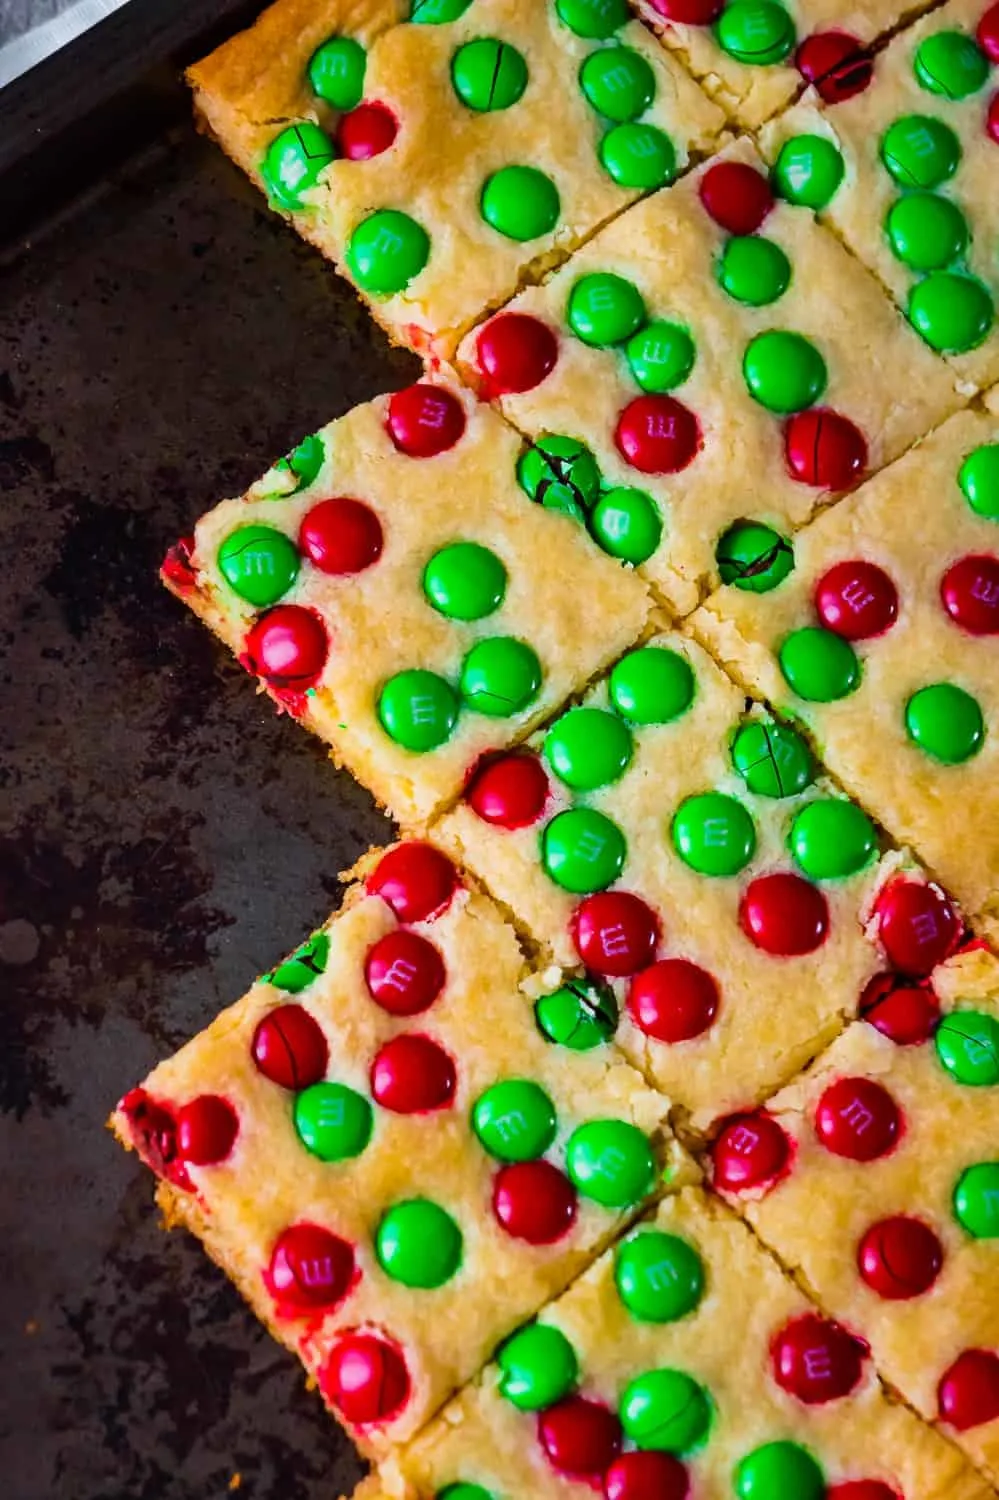 Christmas Cookie Bars are an easy holiday dessert recipe. These vanilla pudding sugar cookie bars are loaded with red and green M&M's.